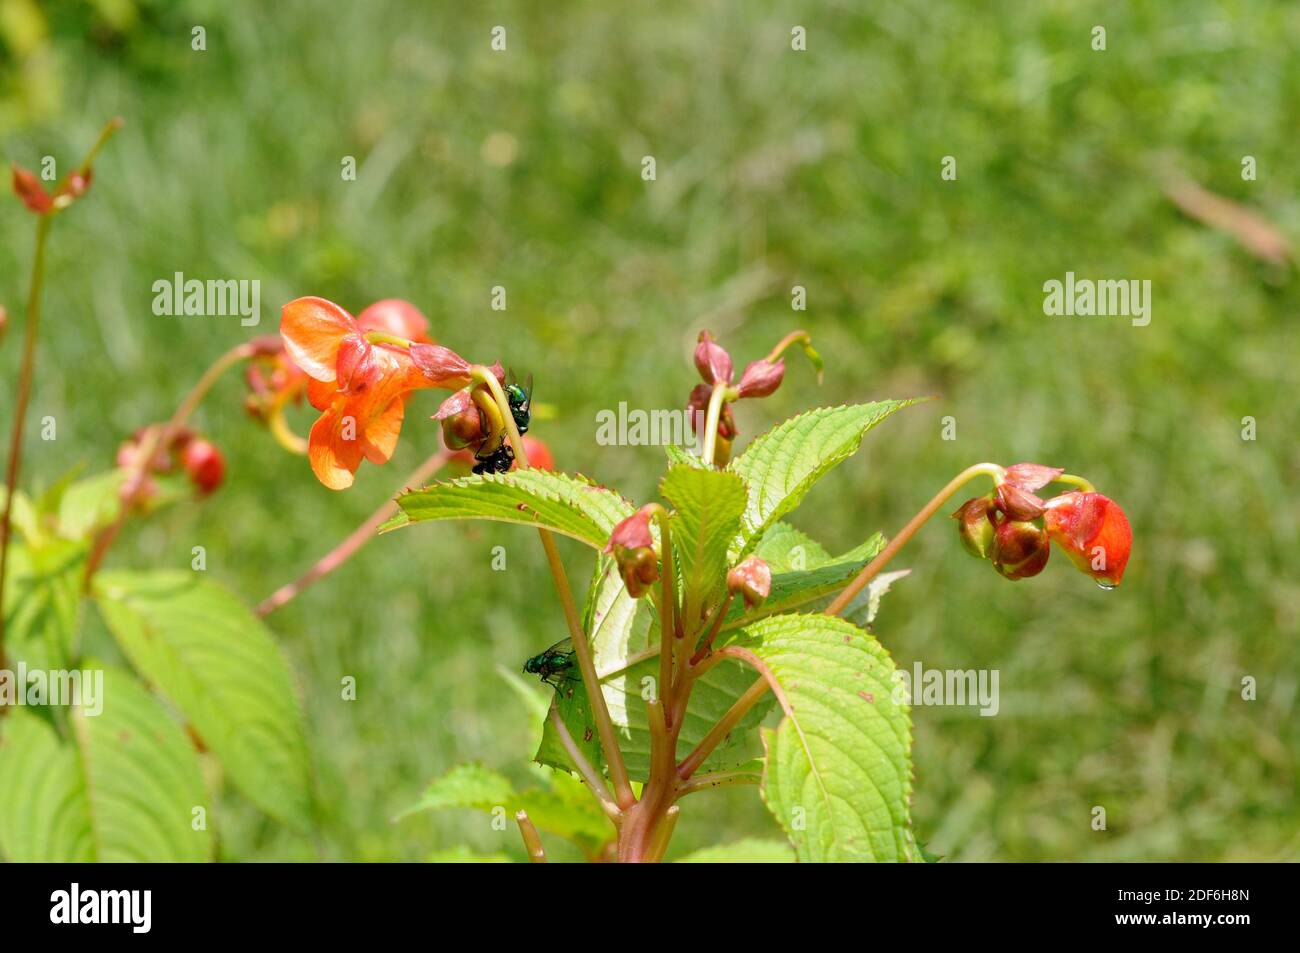 Touch-me-not or jewelweed (Impatiens fischeri). This photo was taken in Bale, Ethiopia. Stock Photo